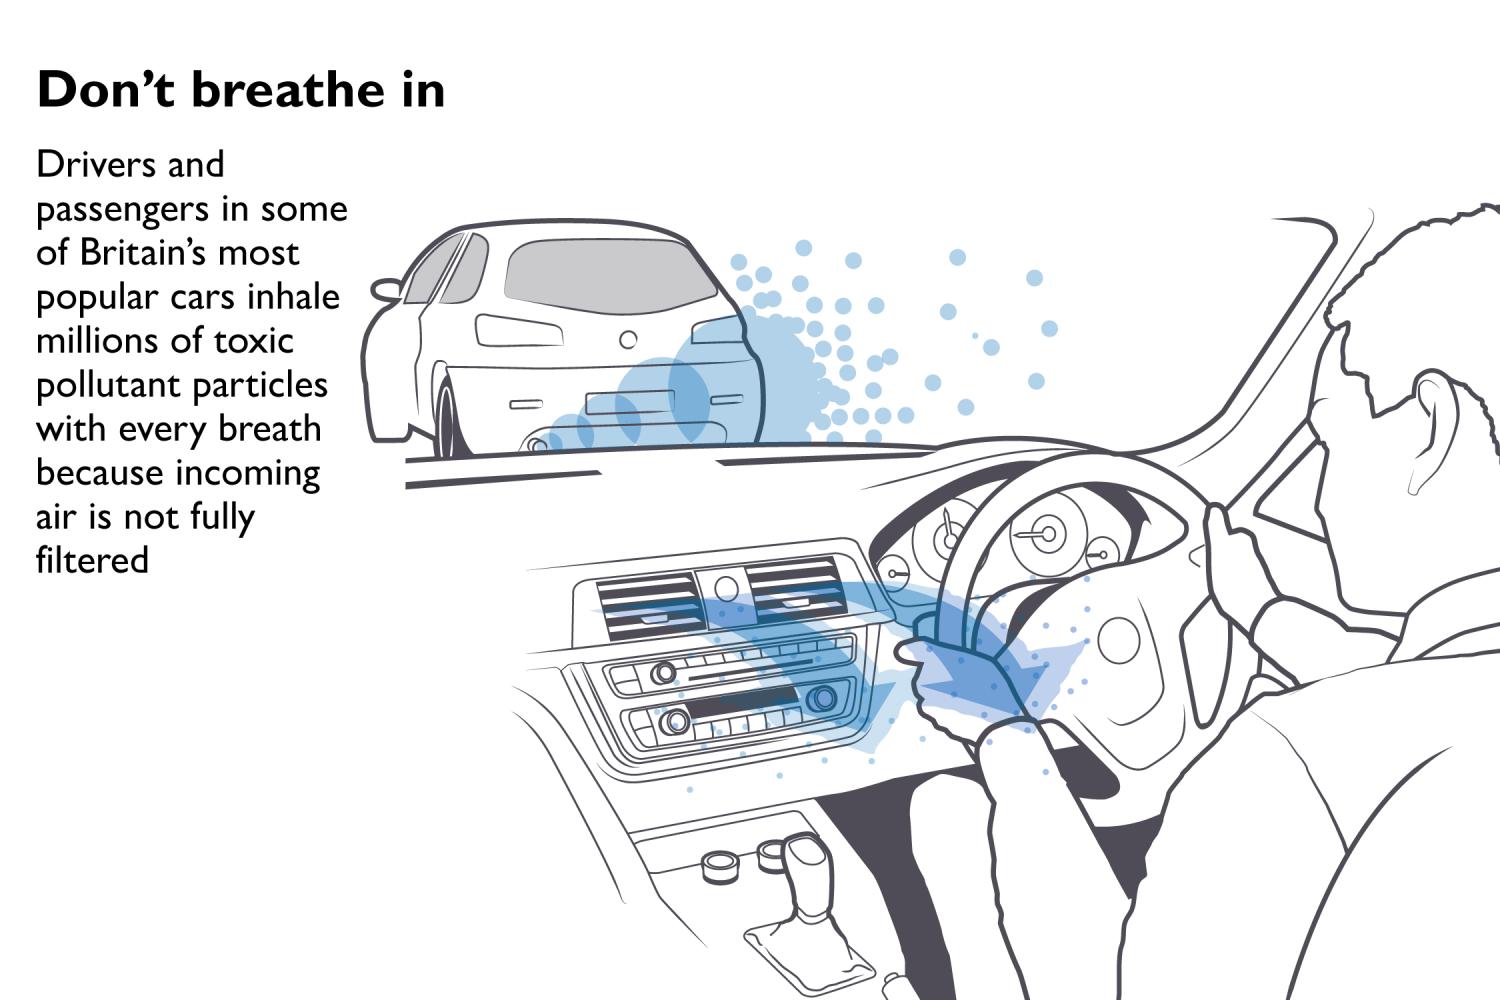 Airbubbl tests: Times report on Emissions Analytics study into air pollution inside cars